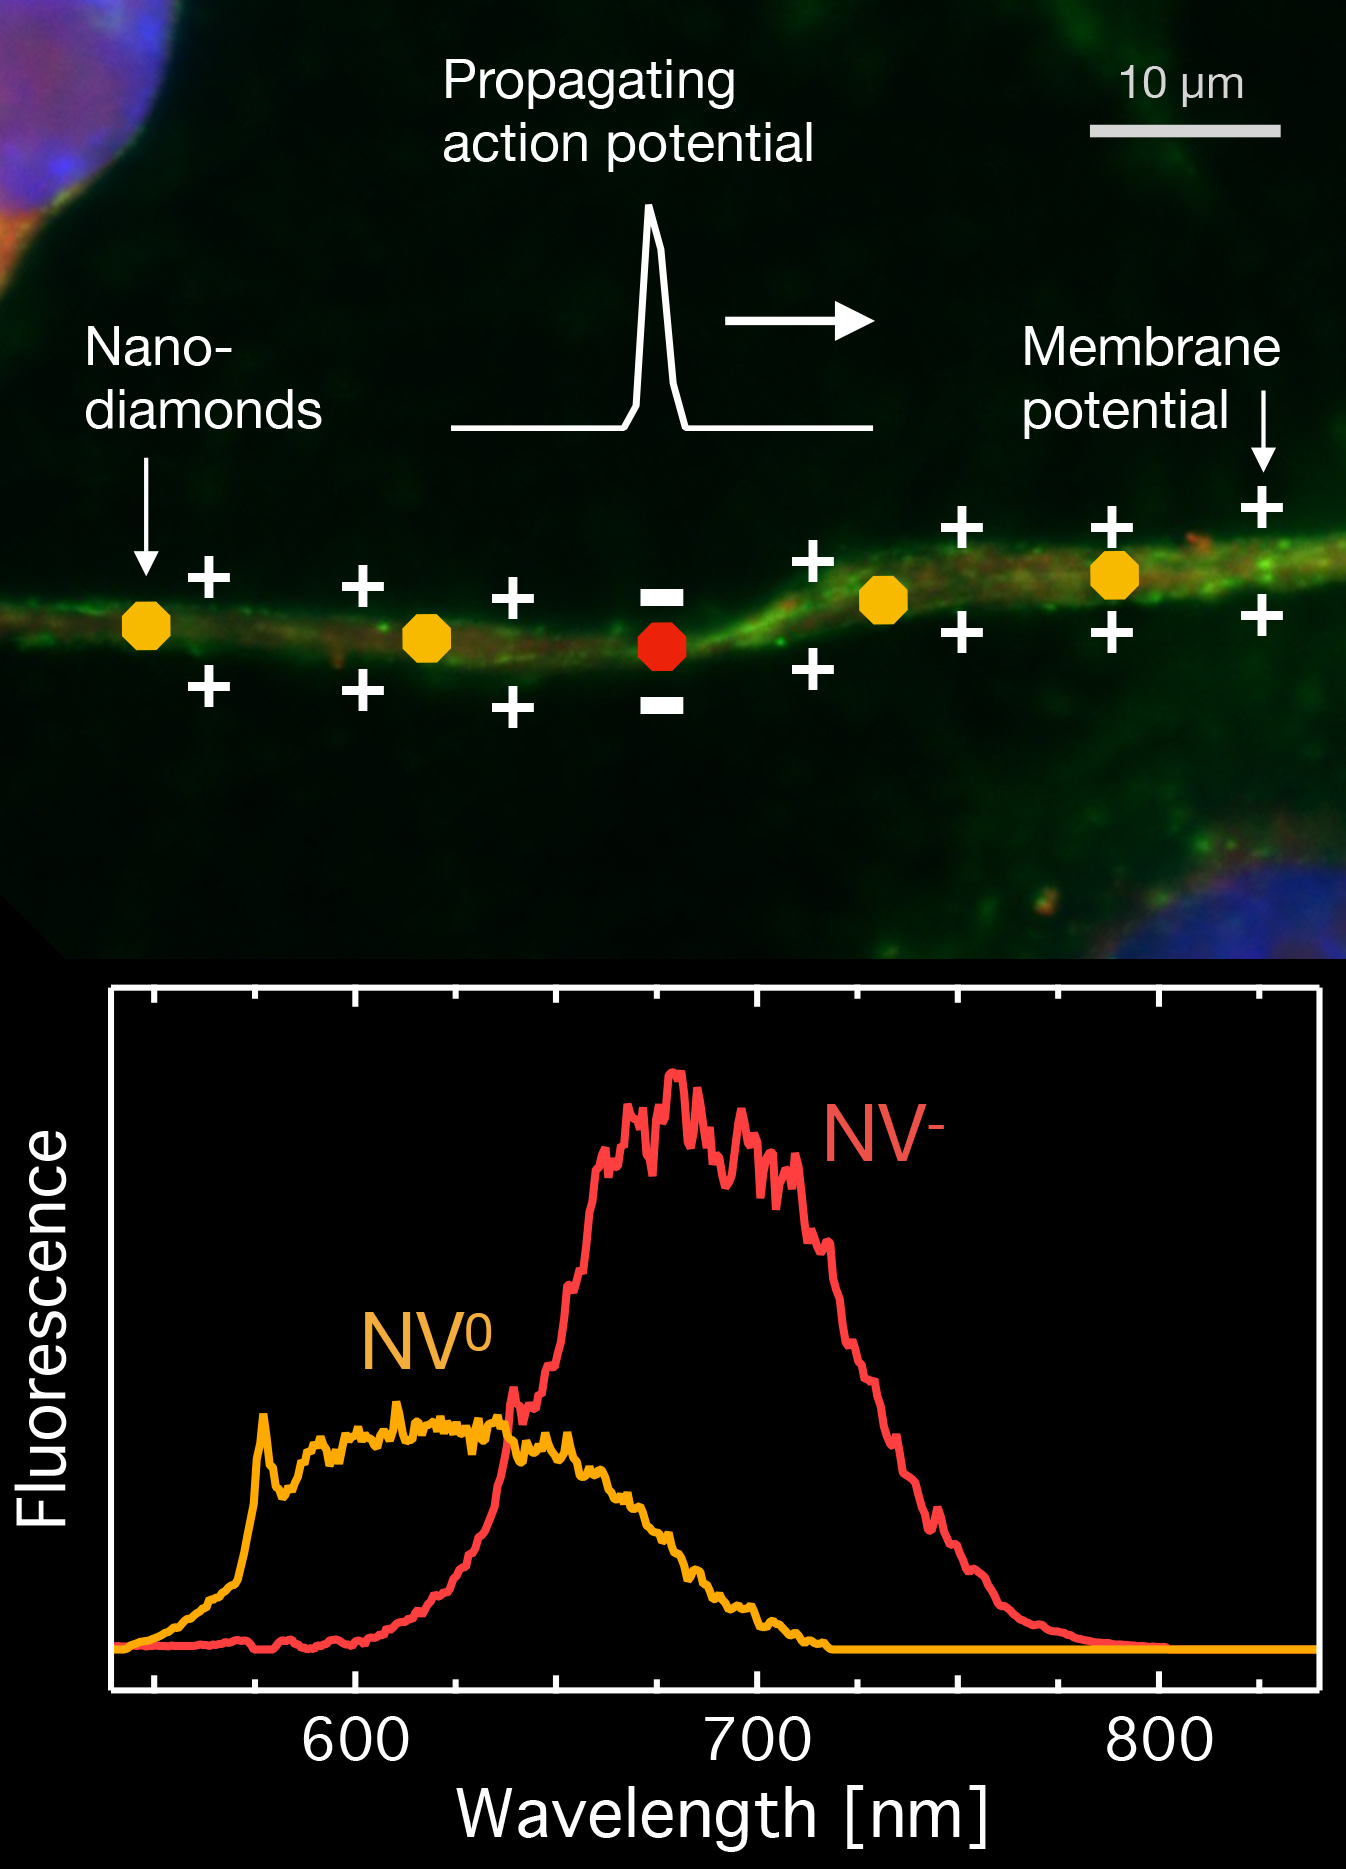 Figure 1. Imaging neuronal signals using fluorescence from the nitrogen-vacancy centre in nanodiamonds. Top: Illustration of an electric potential moving along a neuron. This potential causes a colour change in the fluorescence of the nanodiamond particles. Bottom: The fluorescence spectra associated with the two fluorescence colours. 